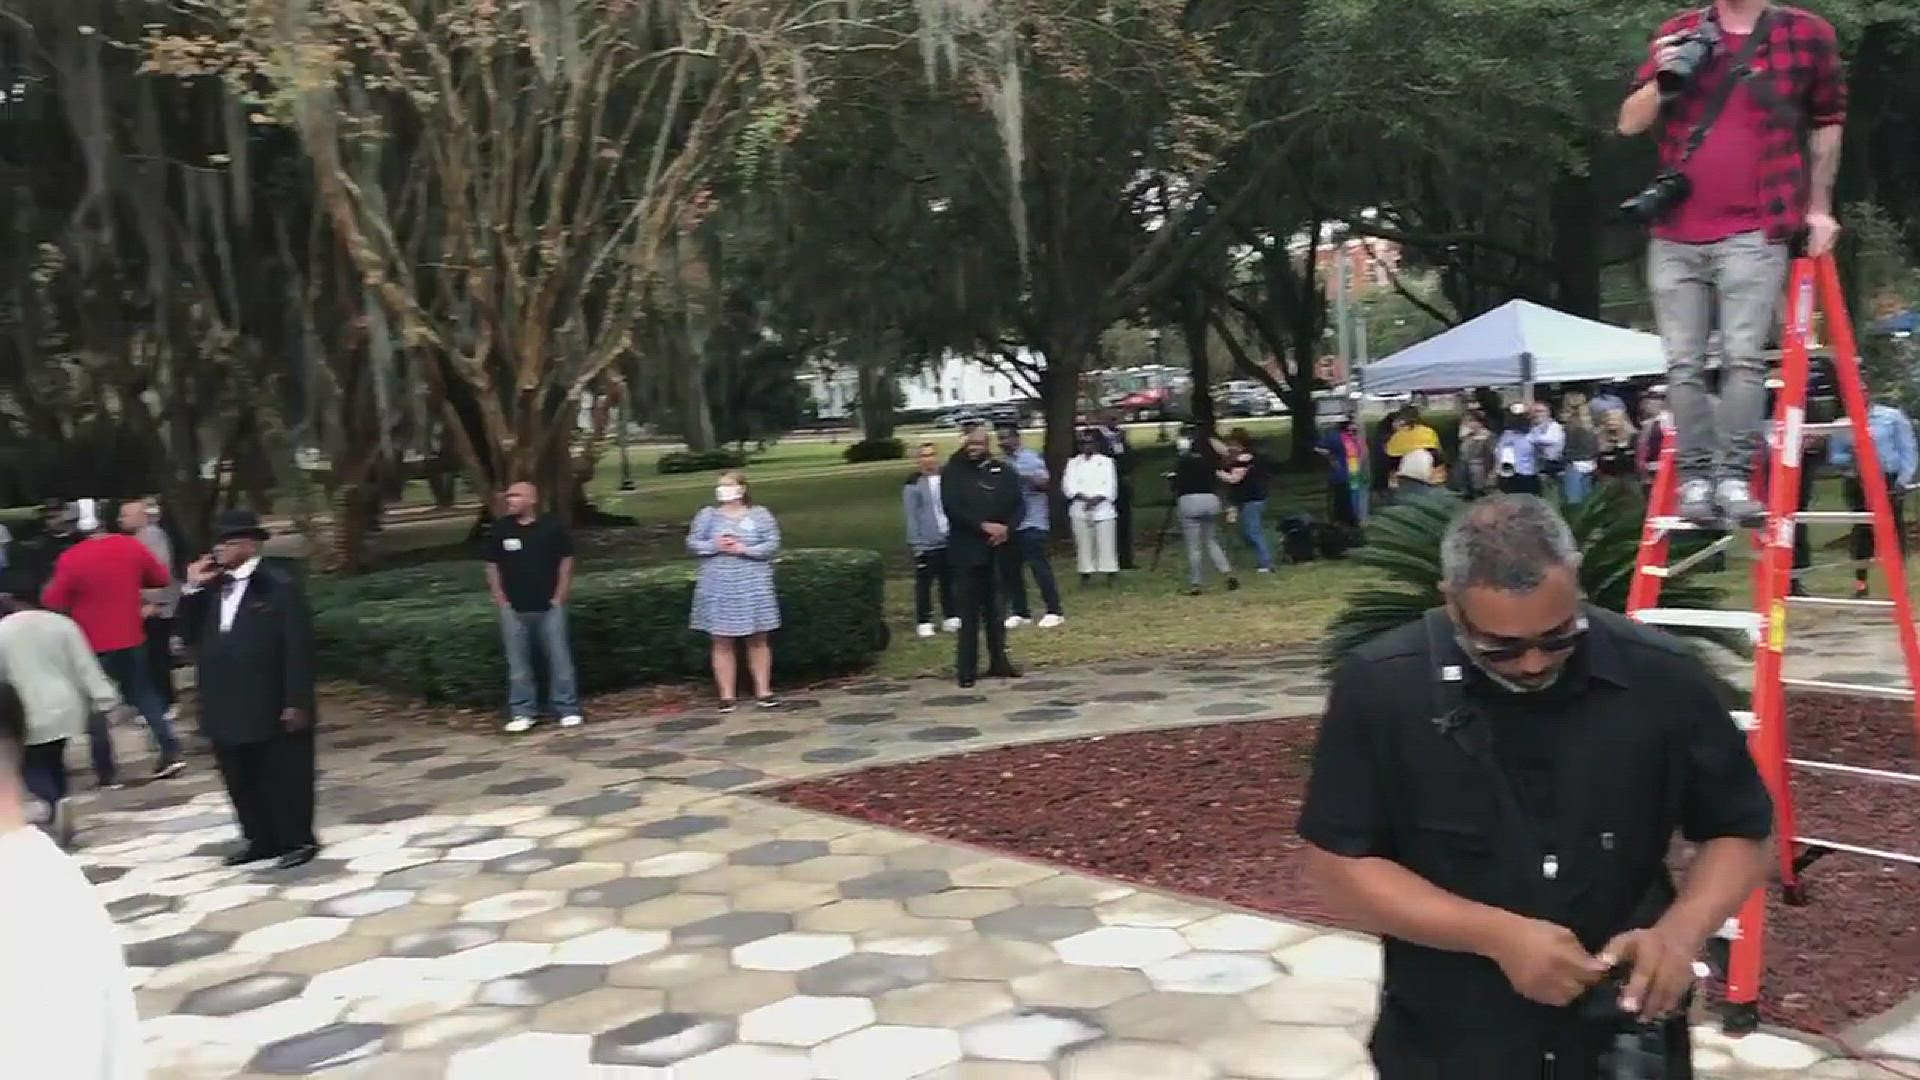 The Rev. Jesse Jackson and pastors arrive at the Glynn County courthouse Thursday and pray.
Credit: Renata Di Gregorio